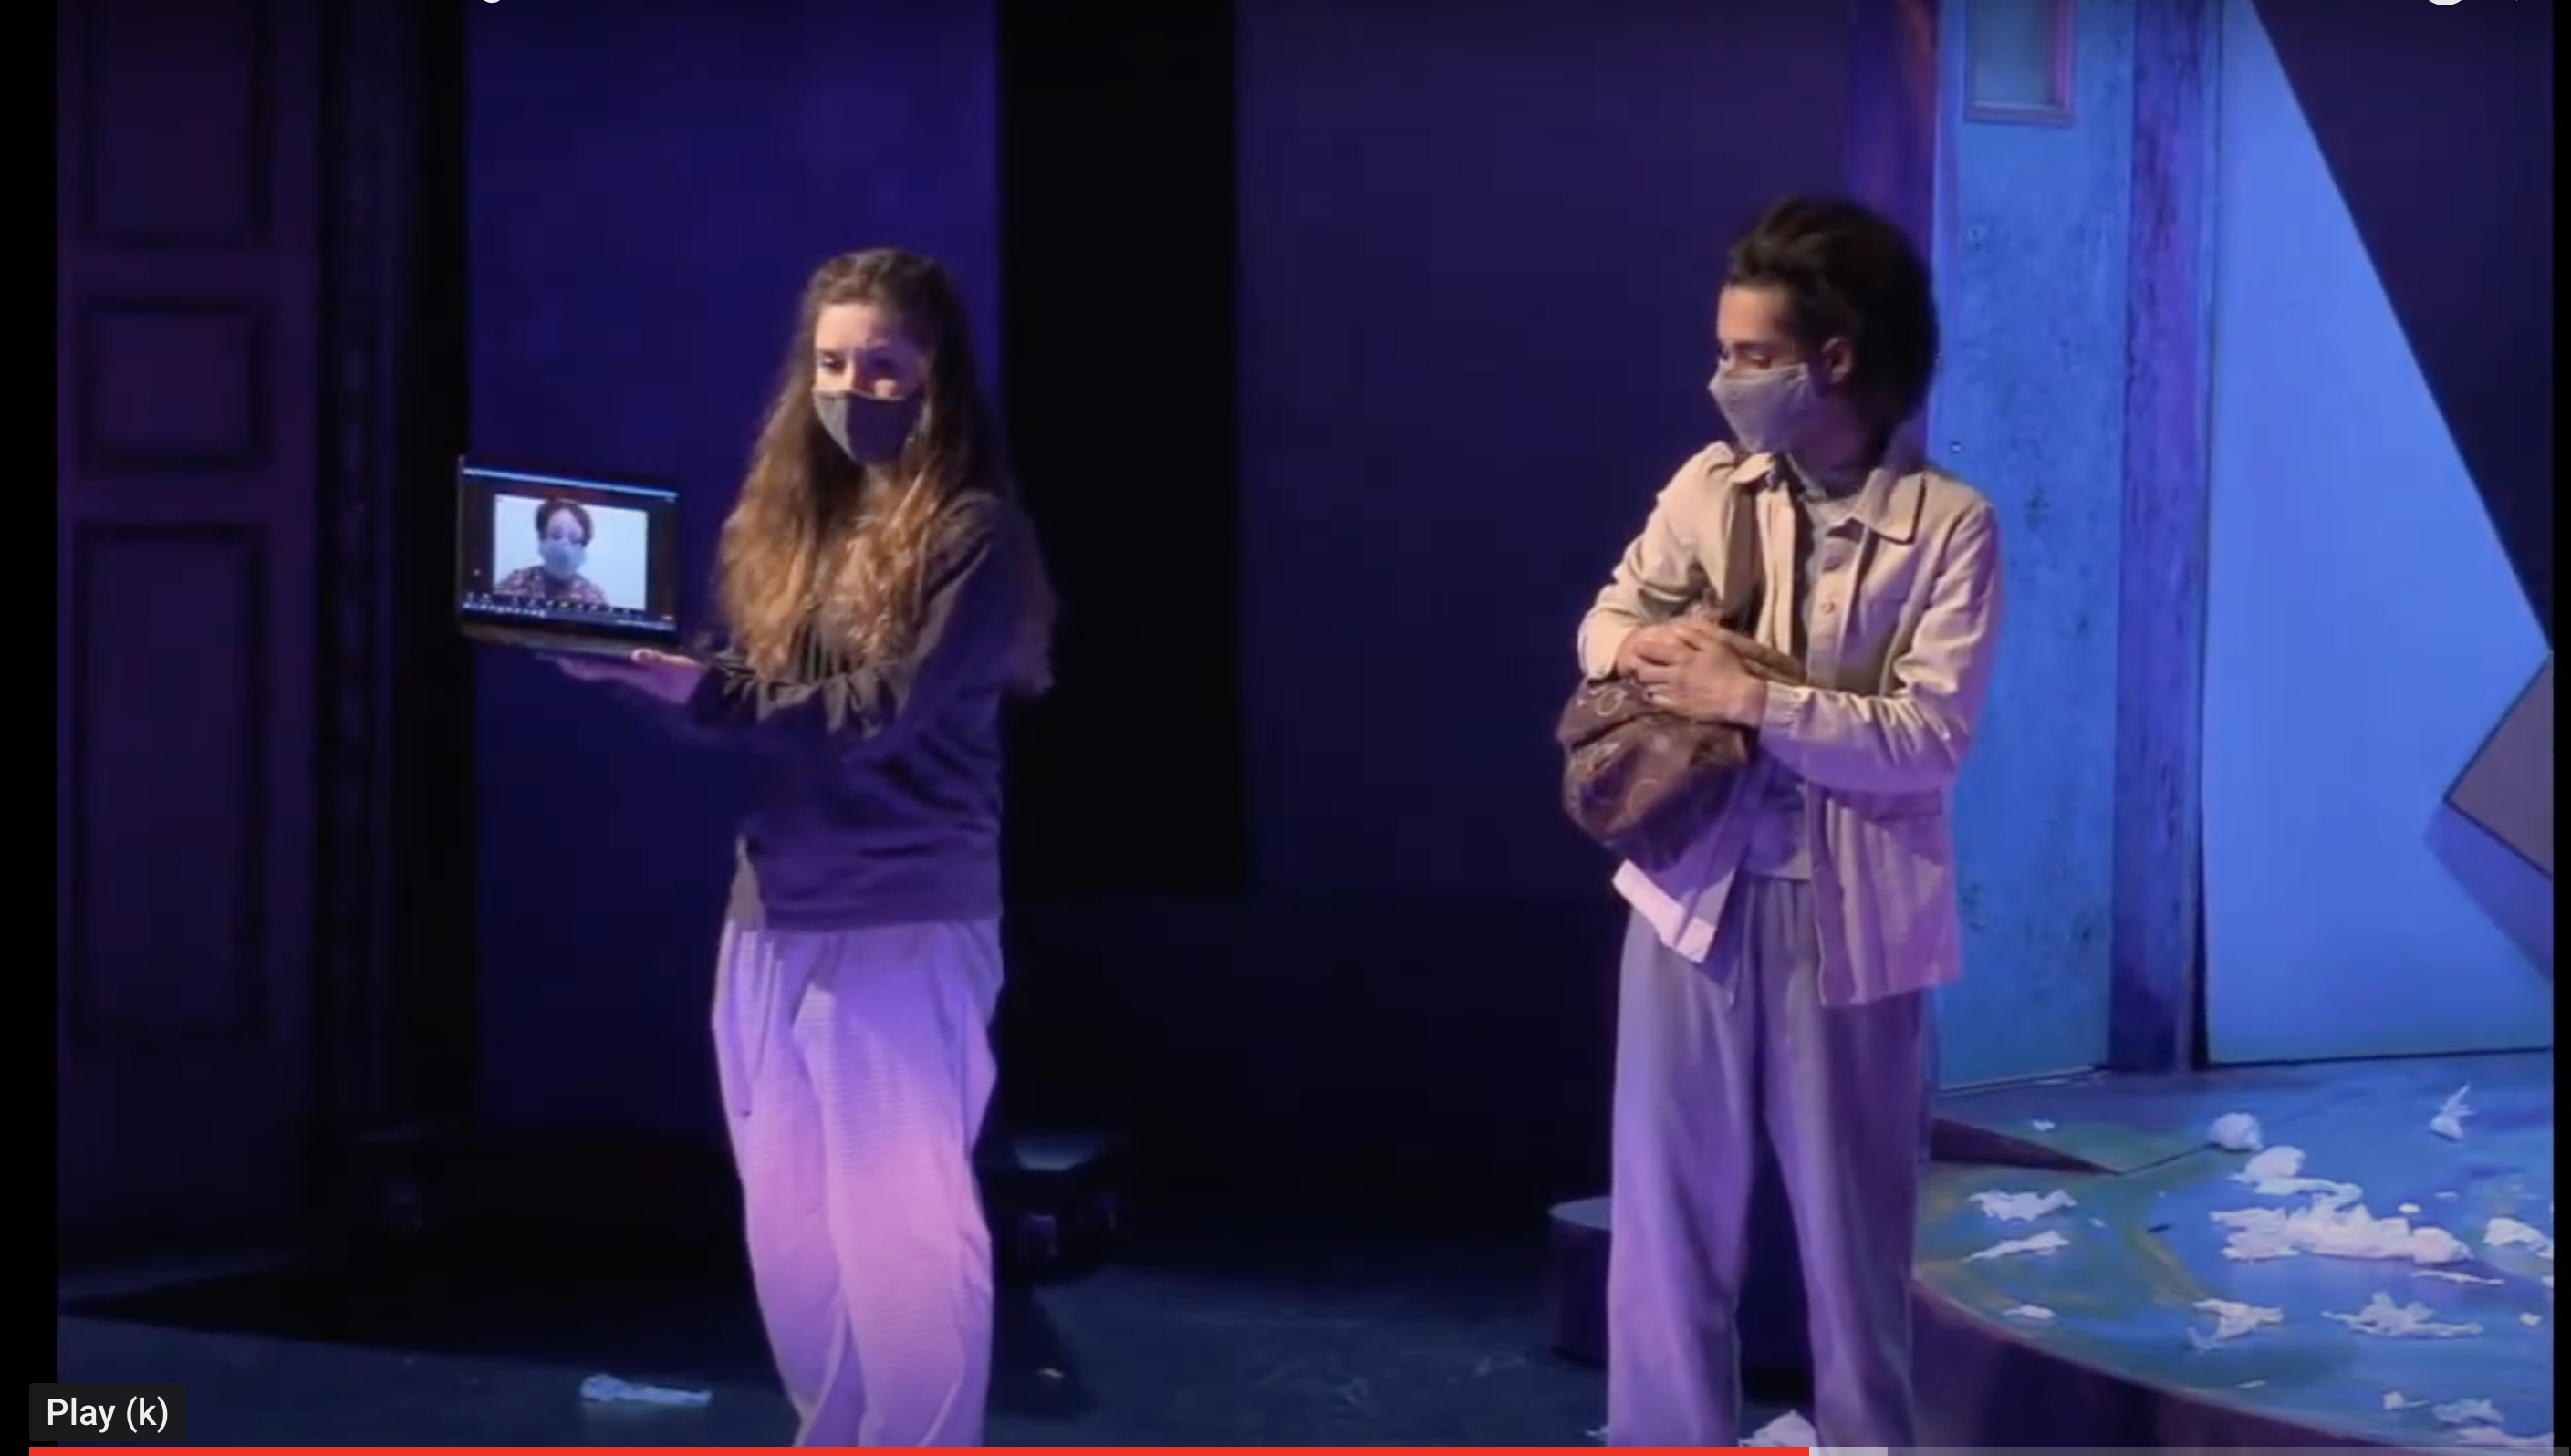 Worcester State Theatre's Production of "Dancing with Demons" has been recognized by the Kennedy Center American College Theatre Festival Region 1